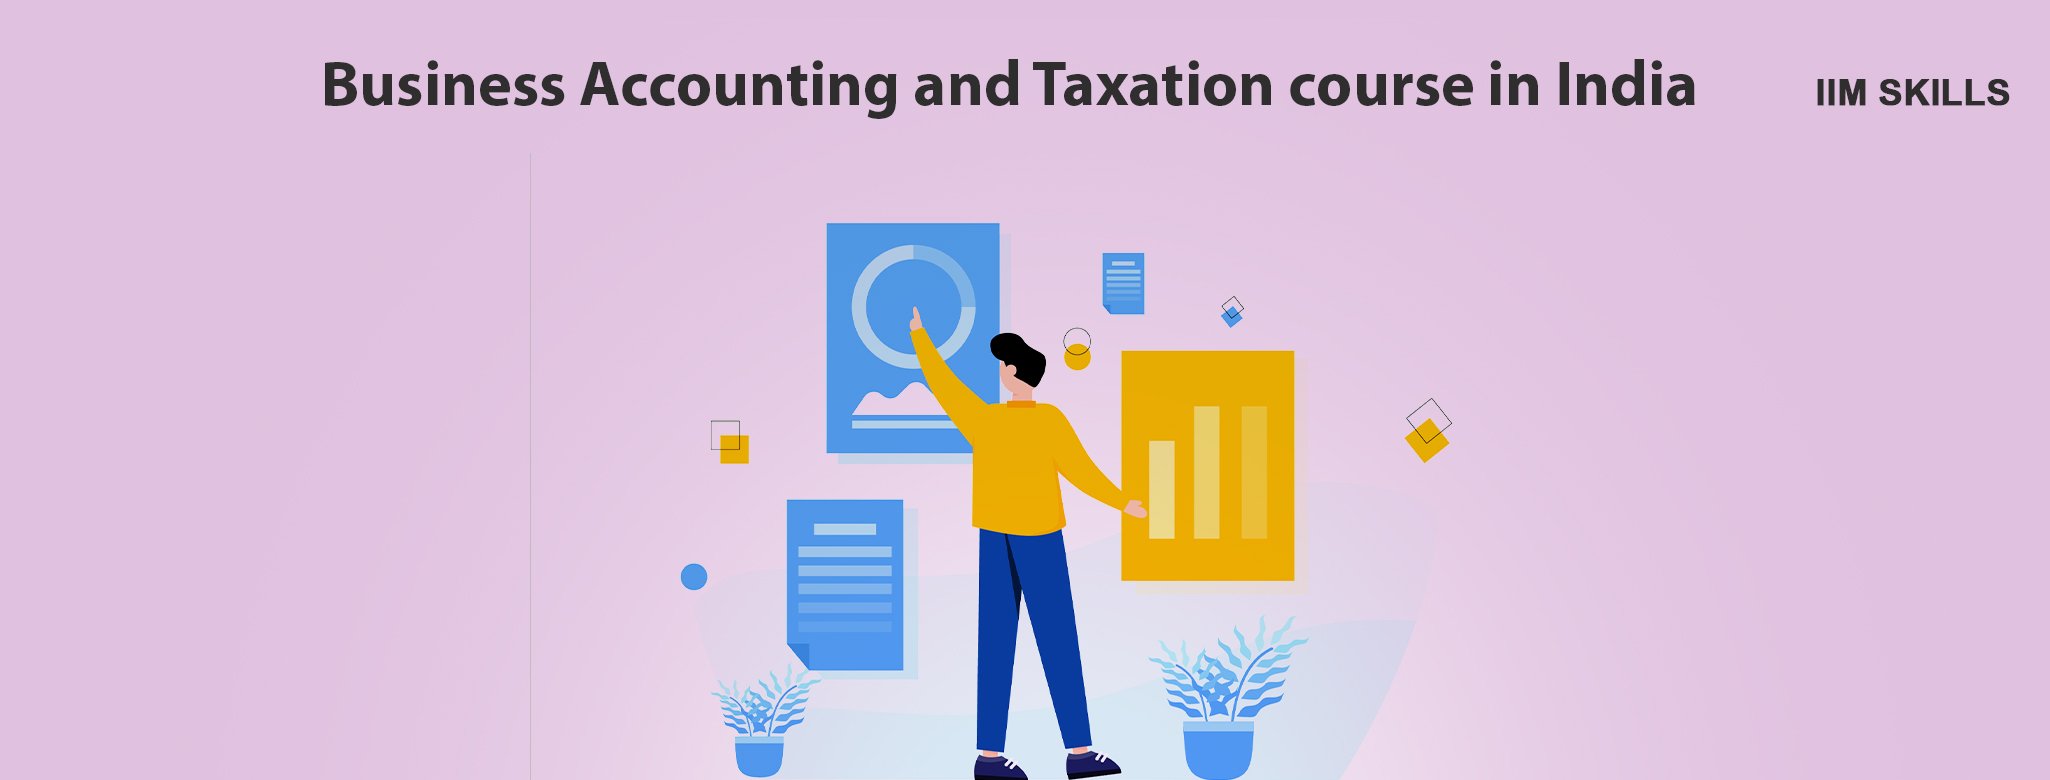 Business Accounting and Taxation course in India